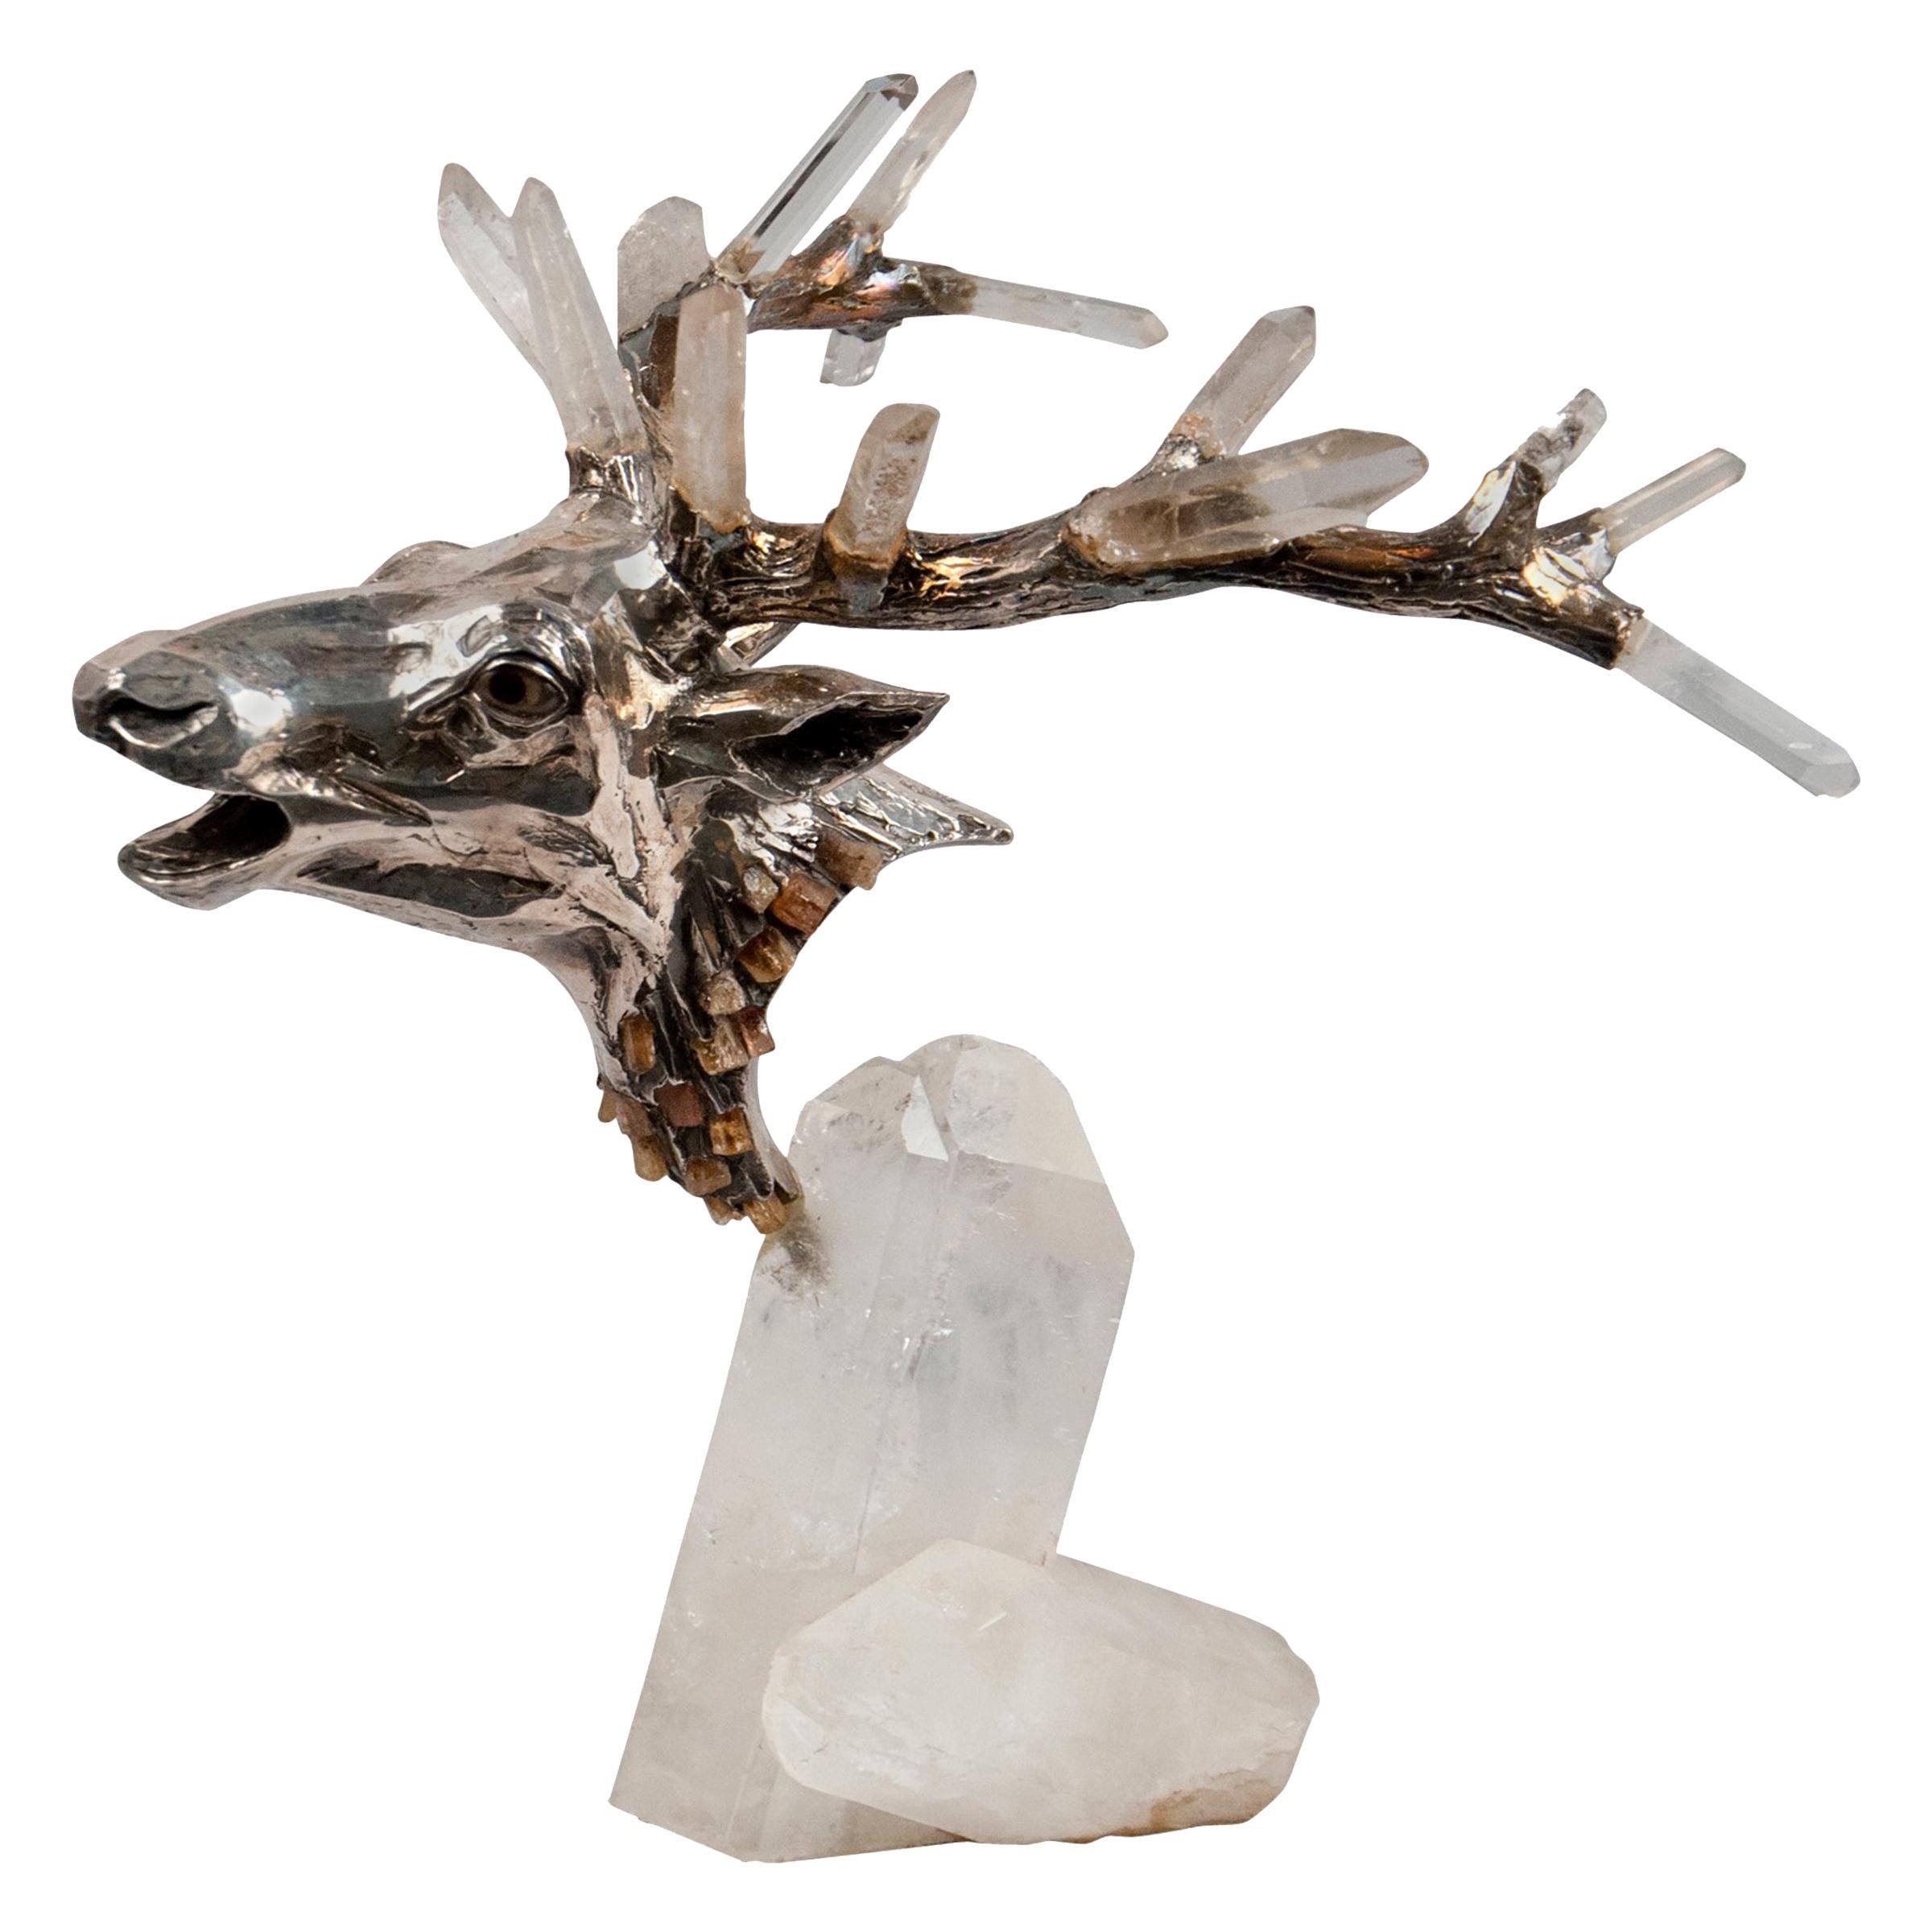 Deer Head by Mellerio dits Meller 'founded 1613' France, circa 1980 For Sale